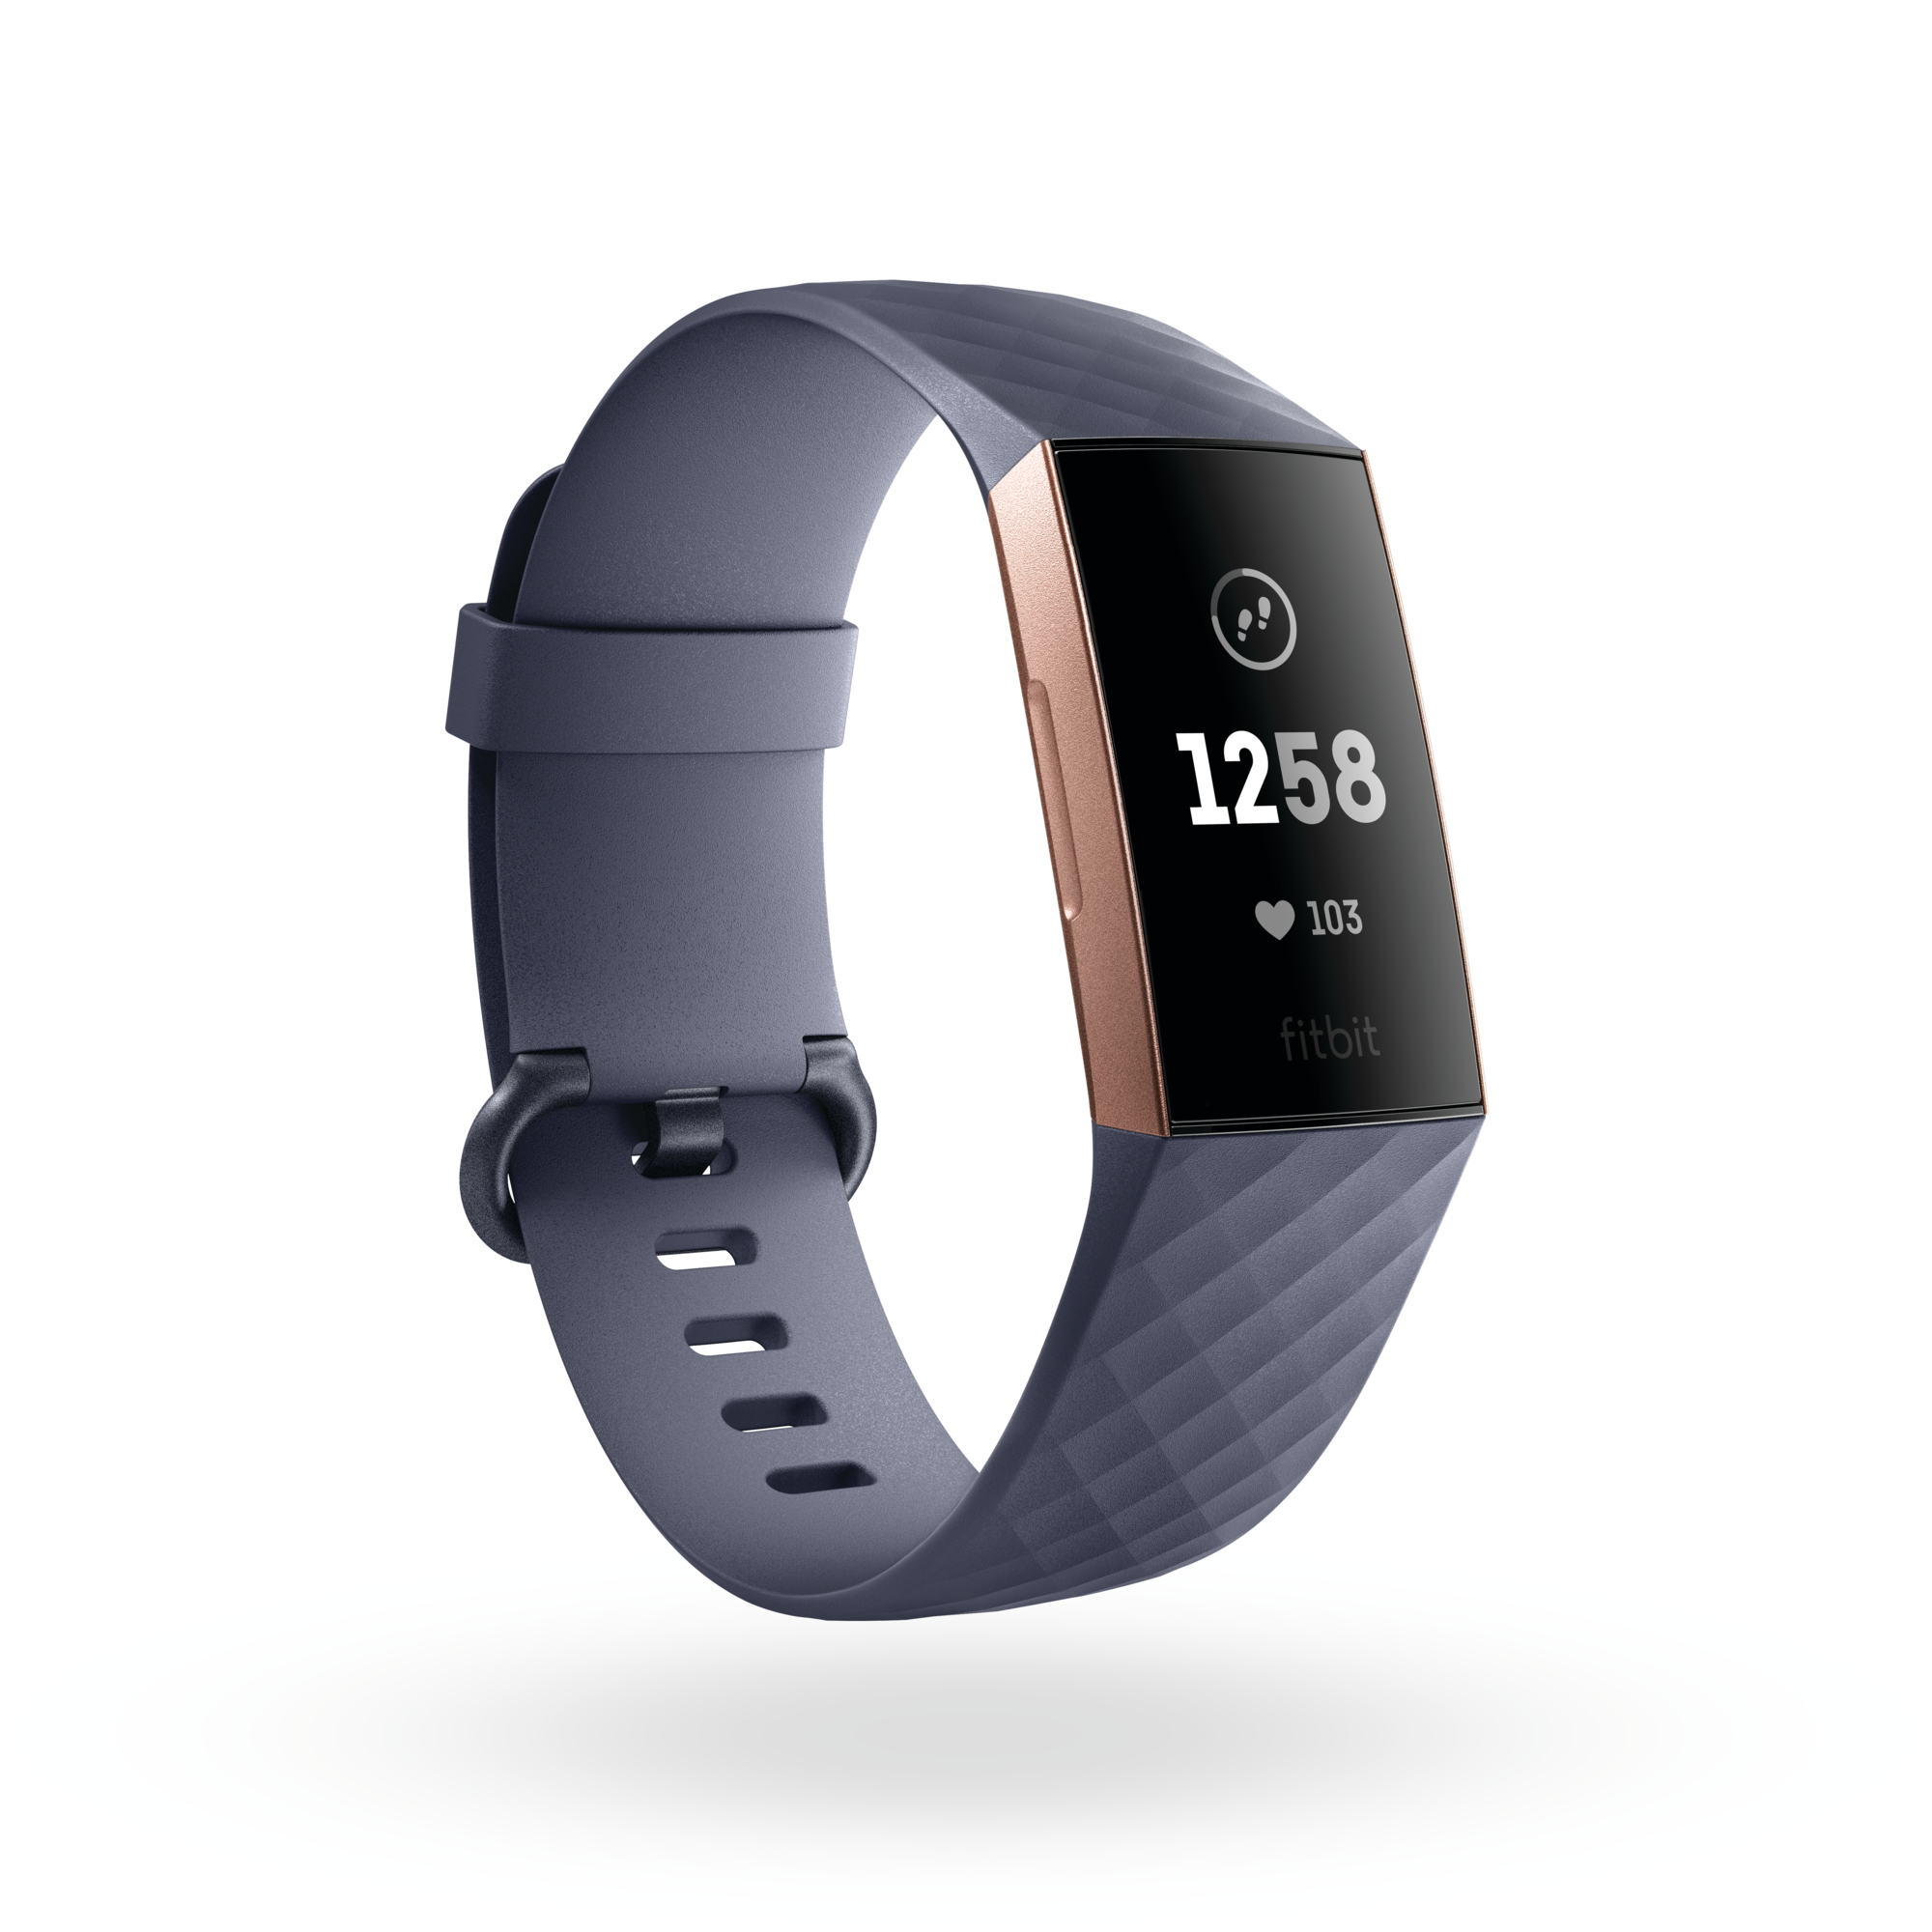 can you swim with a charge 3 fitbit